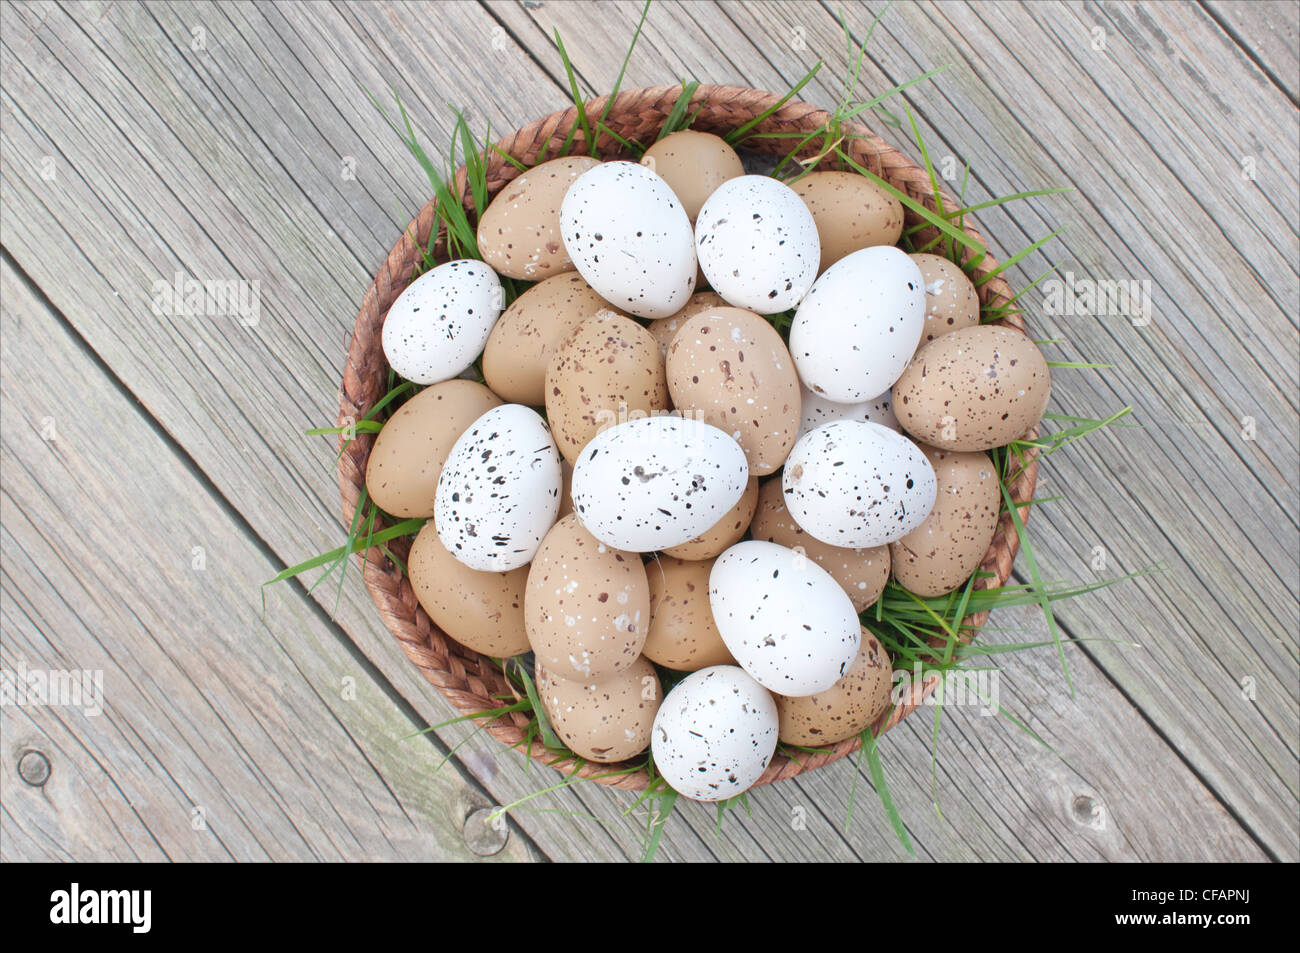 Speckled eggs inside a basket with strands of grass Stock Photo